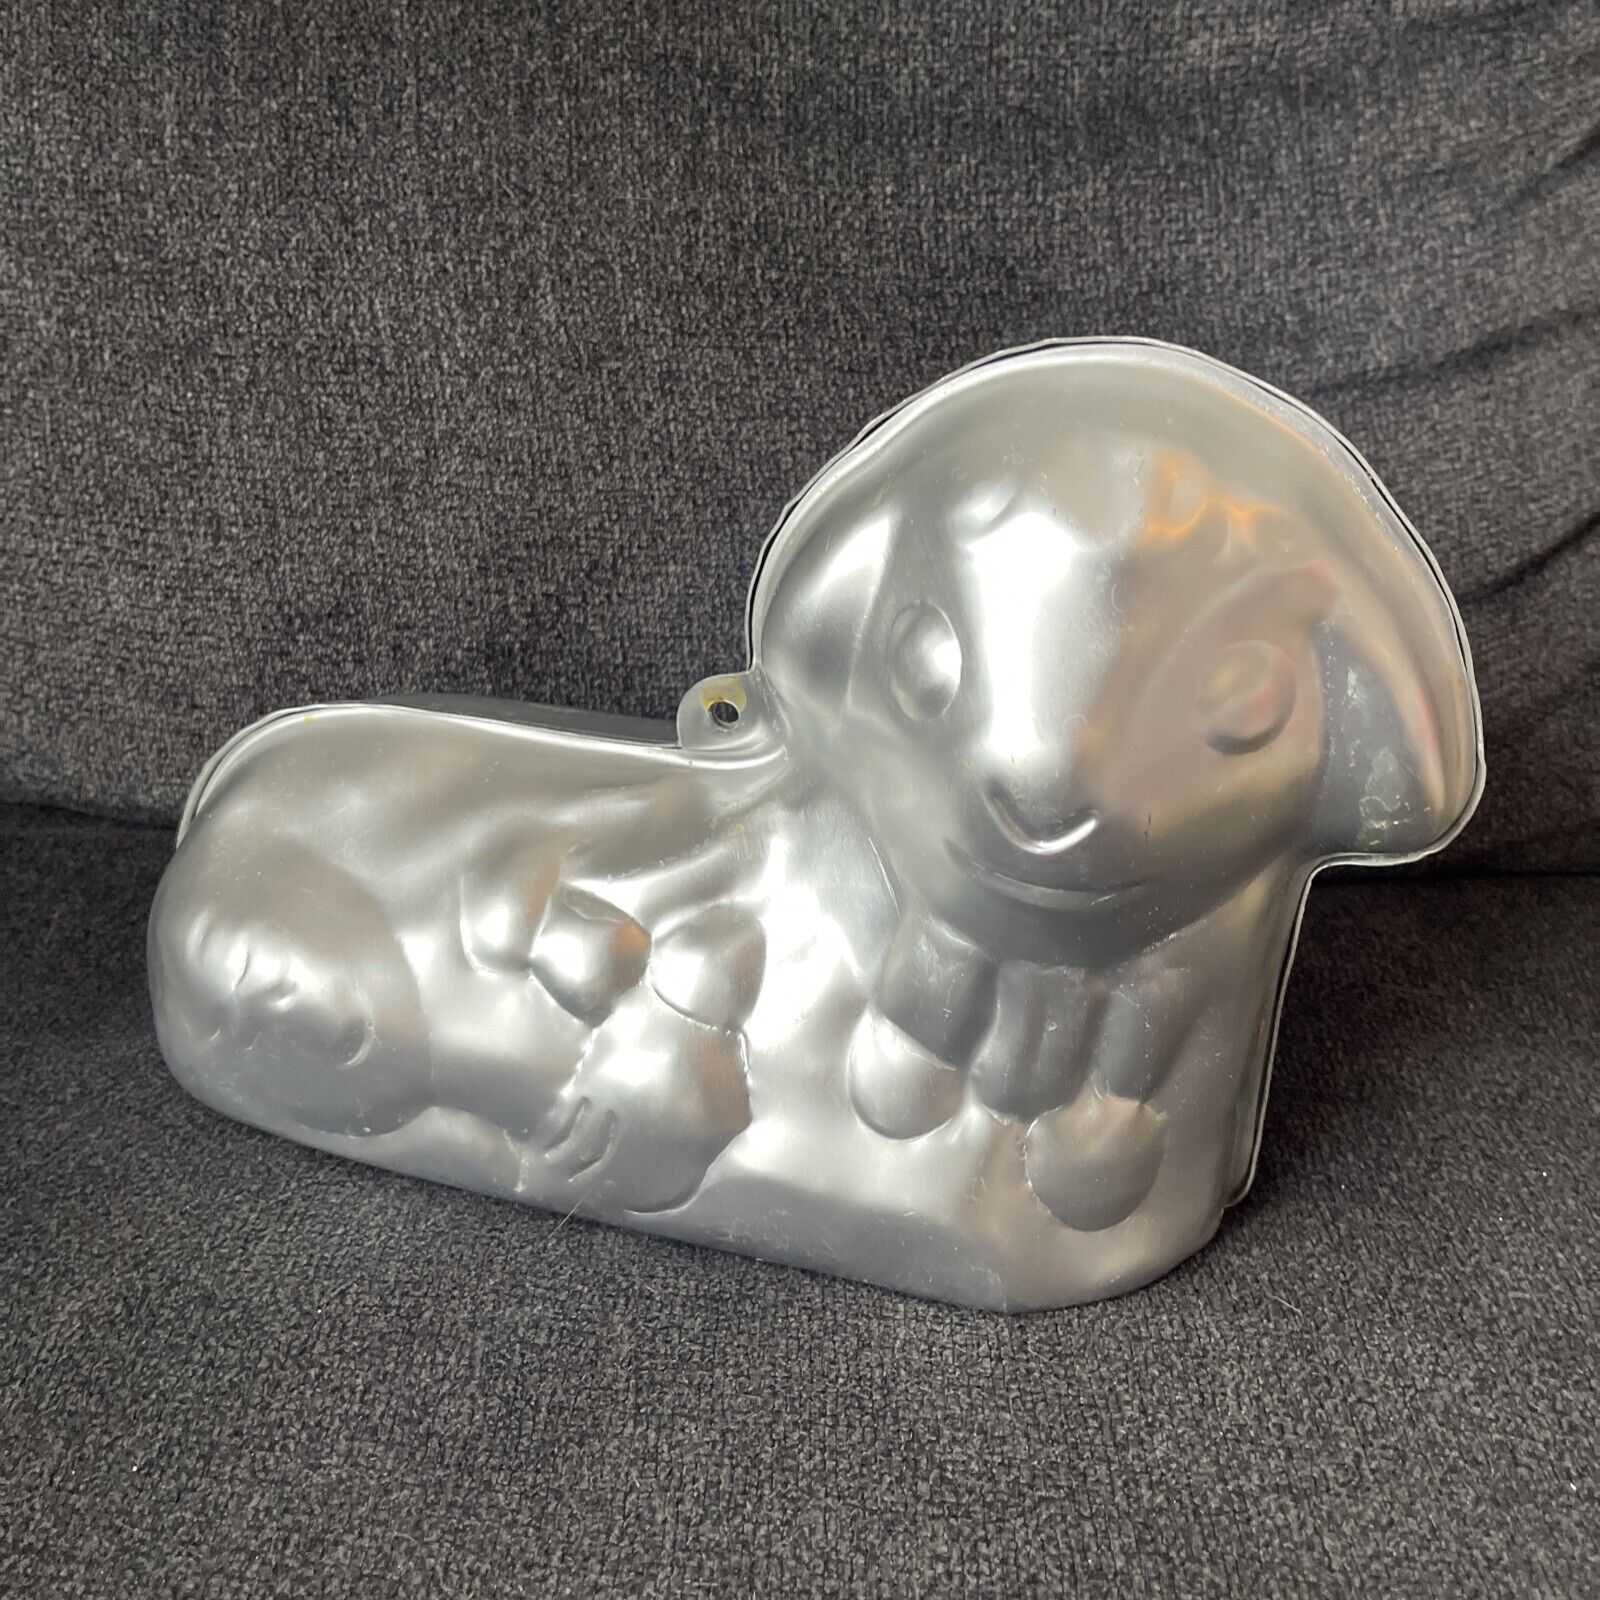 1976 Wilton Cake Pan “Little Lamb” Holiday Mold With Directions Unused